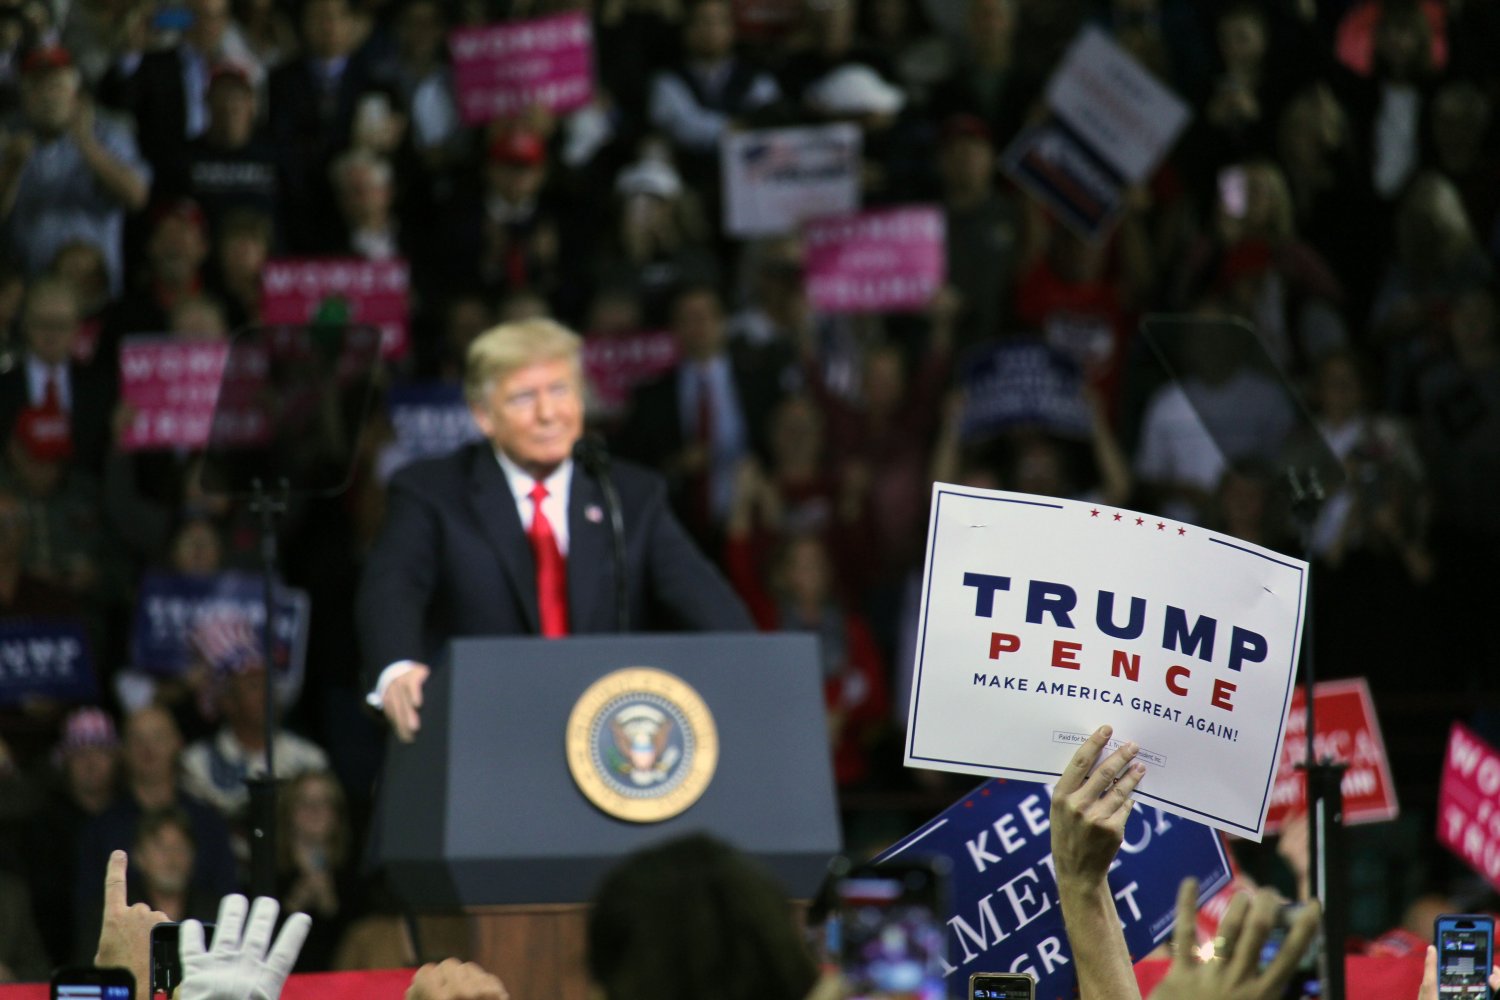 A member of the crowd hold up a sign as President Donald Trump speaks. Trump spoke in Topeka, Kansas on Oct. 6 to show support for Secretary of State of Kansas Kris Kobach, who is running for governer, and Steve Watkins, who is running for Senate, while also promoting his 2020 campaign.